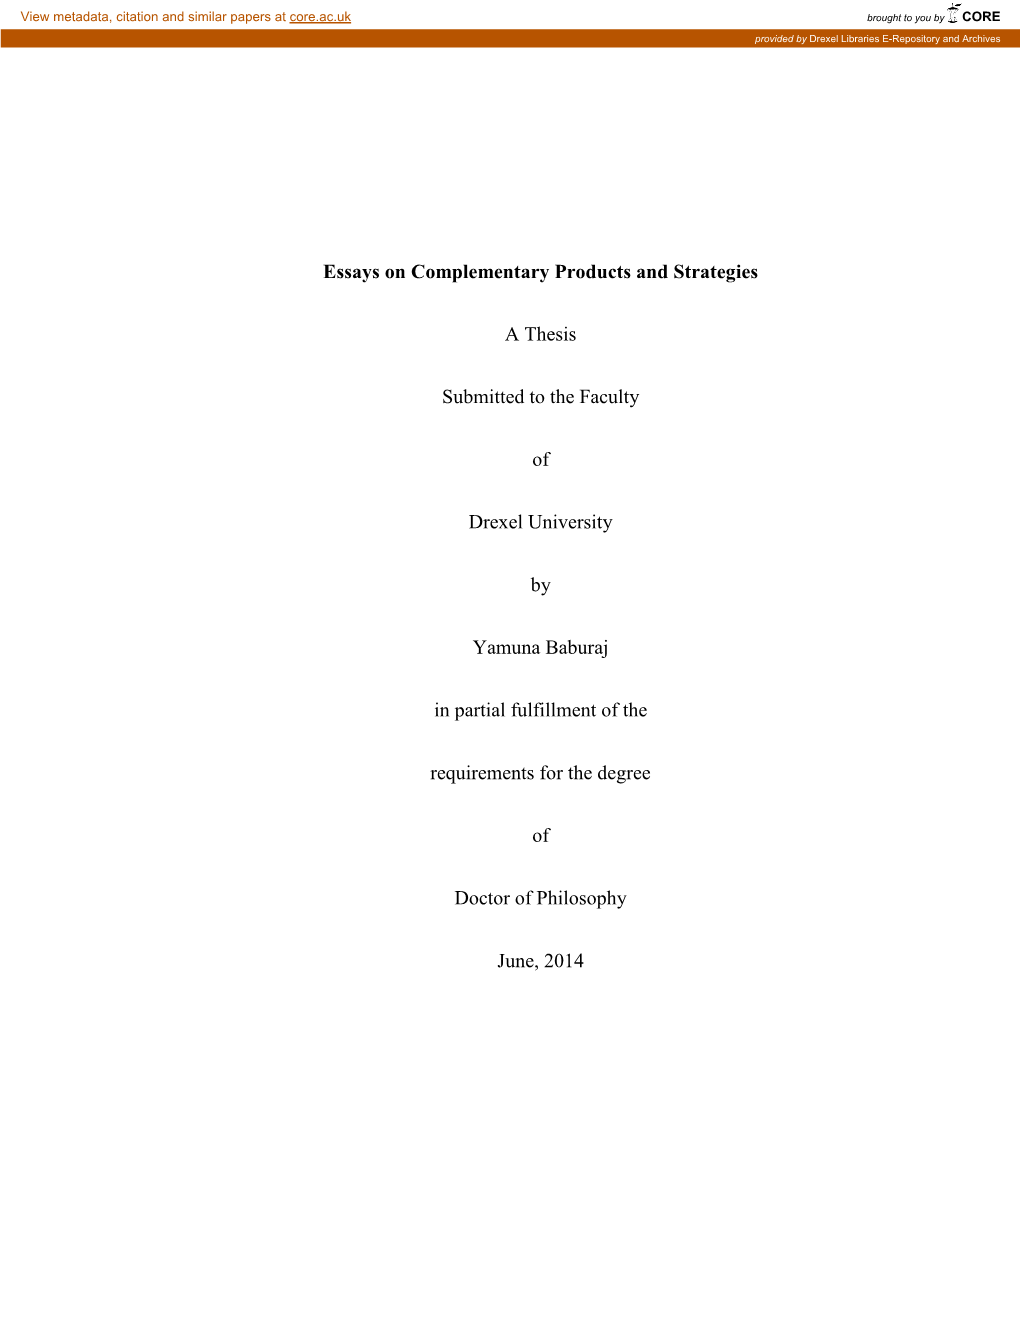 Essays on Complementary Products and Strategies